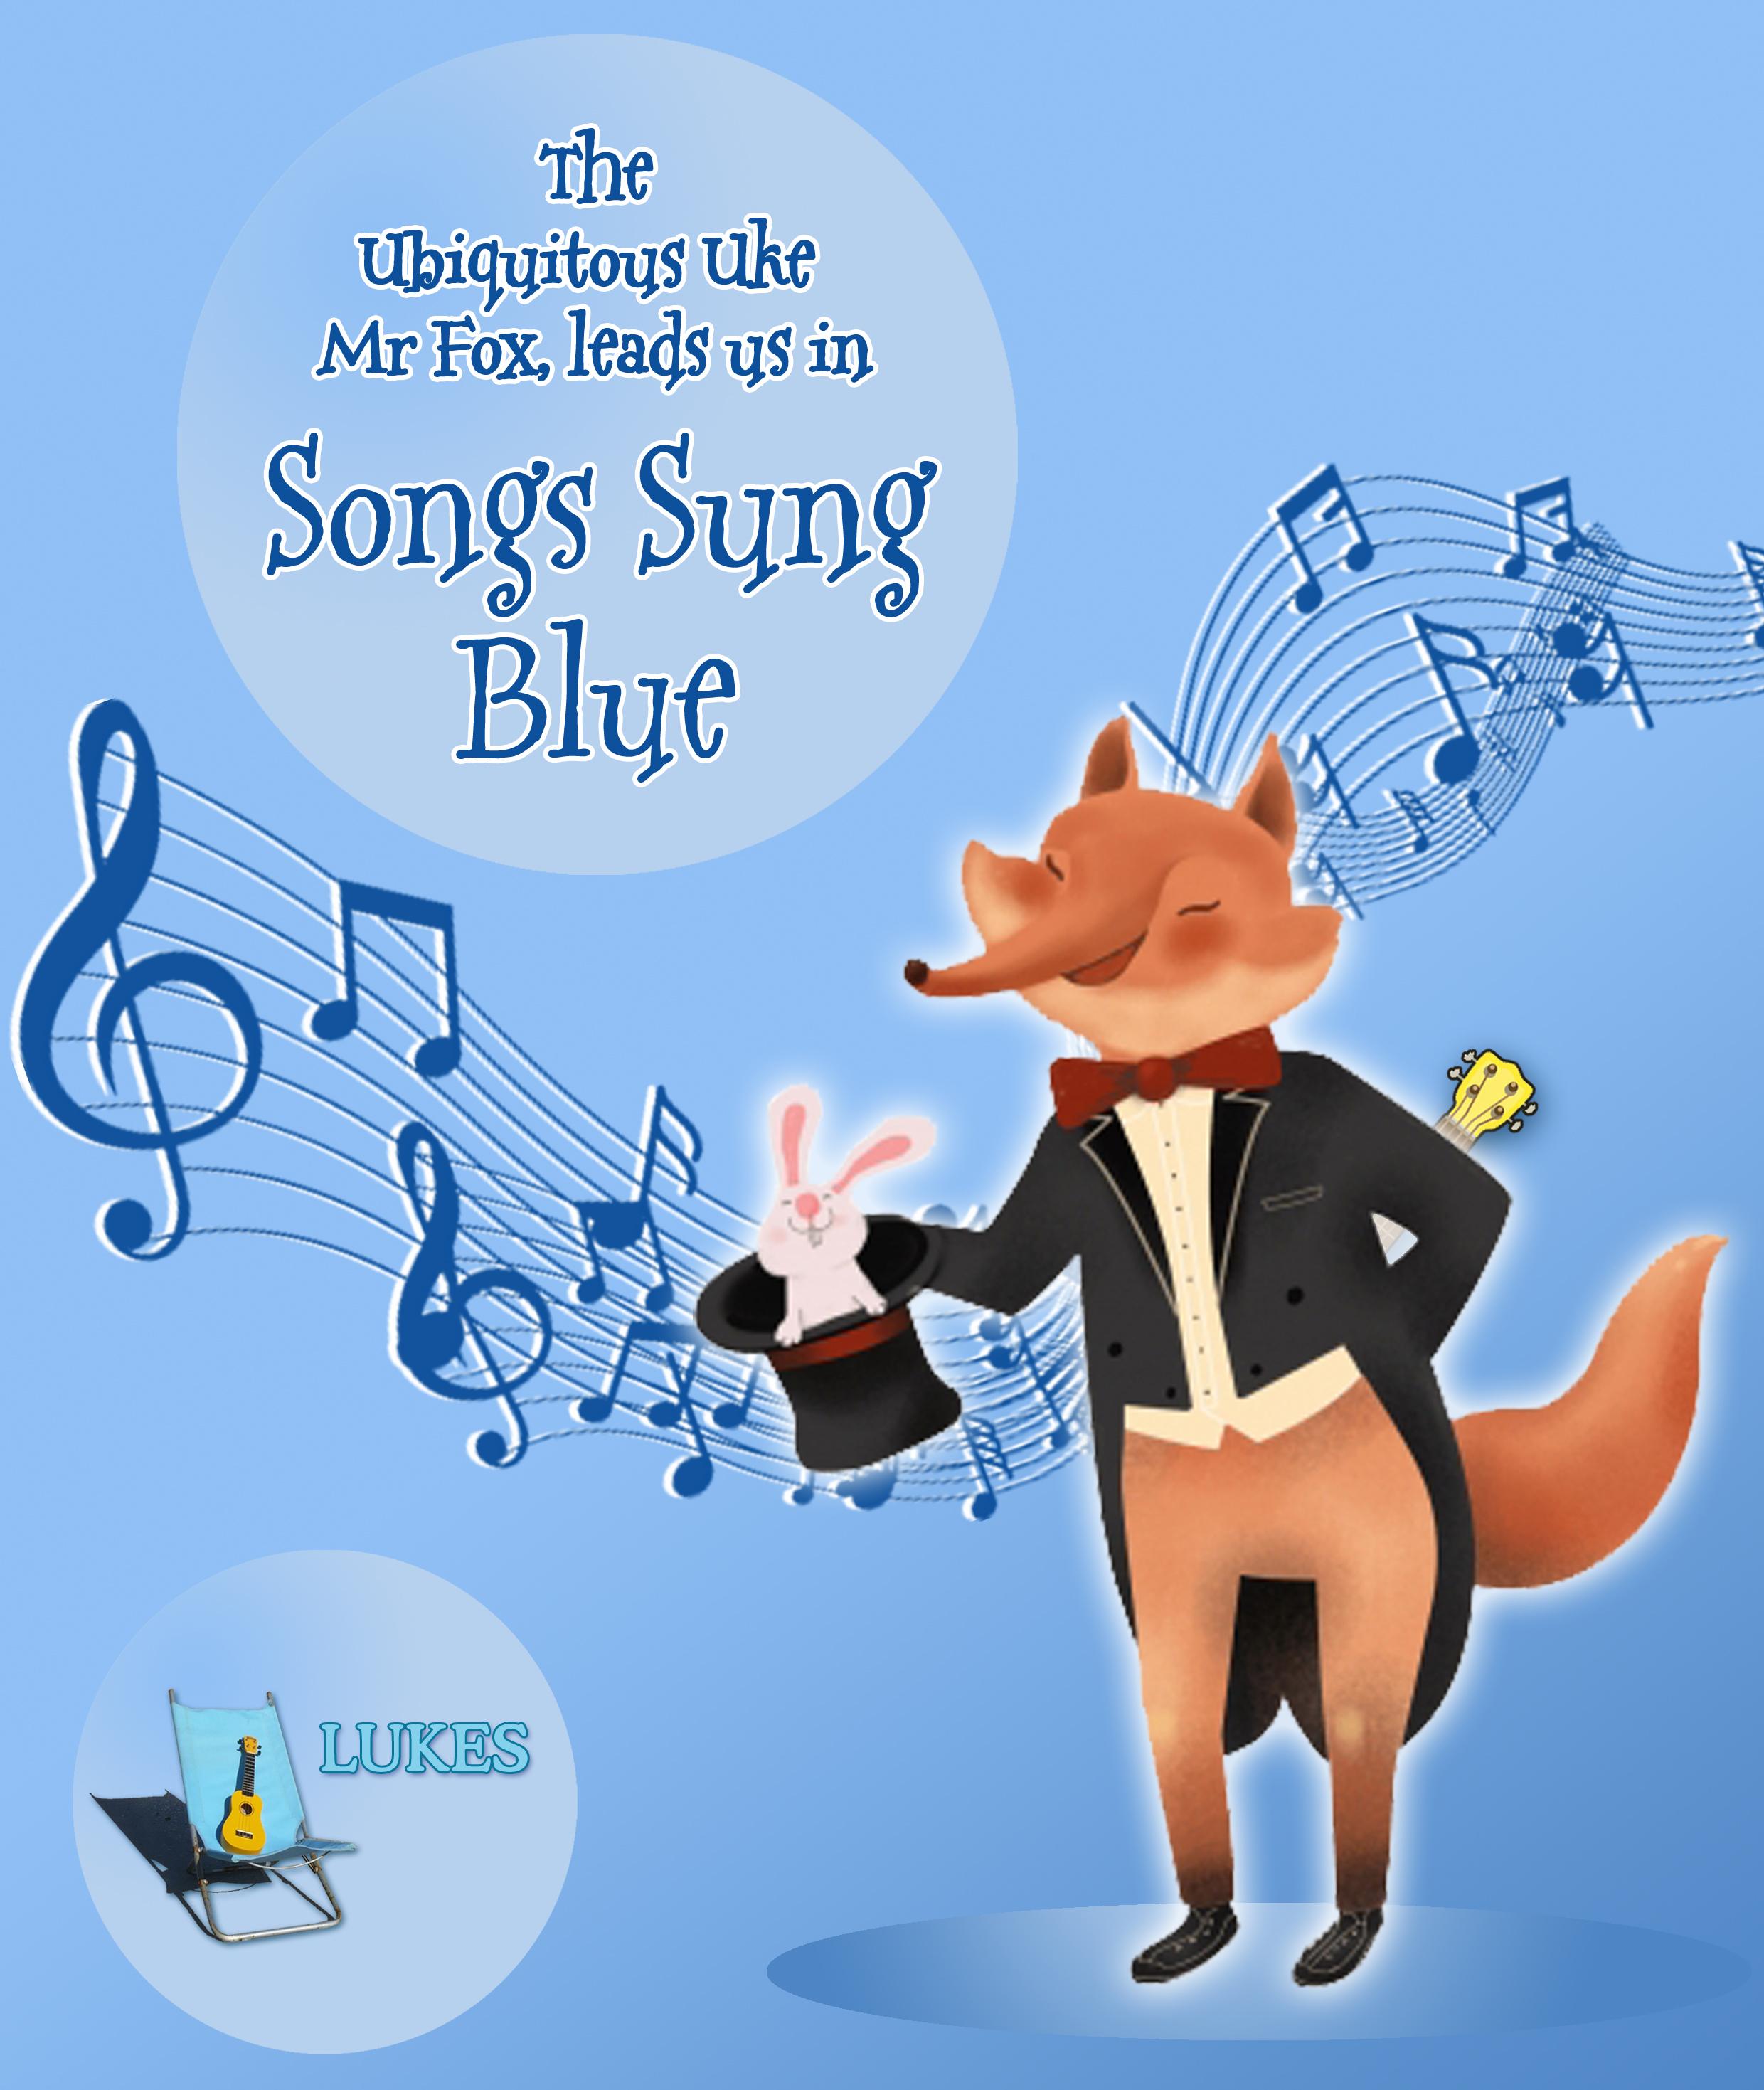 SONGS SUNG BLUE with The Ubiquitous Uke - Mr Fox